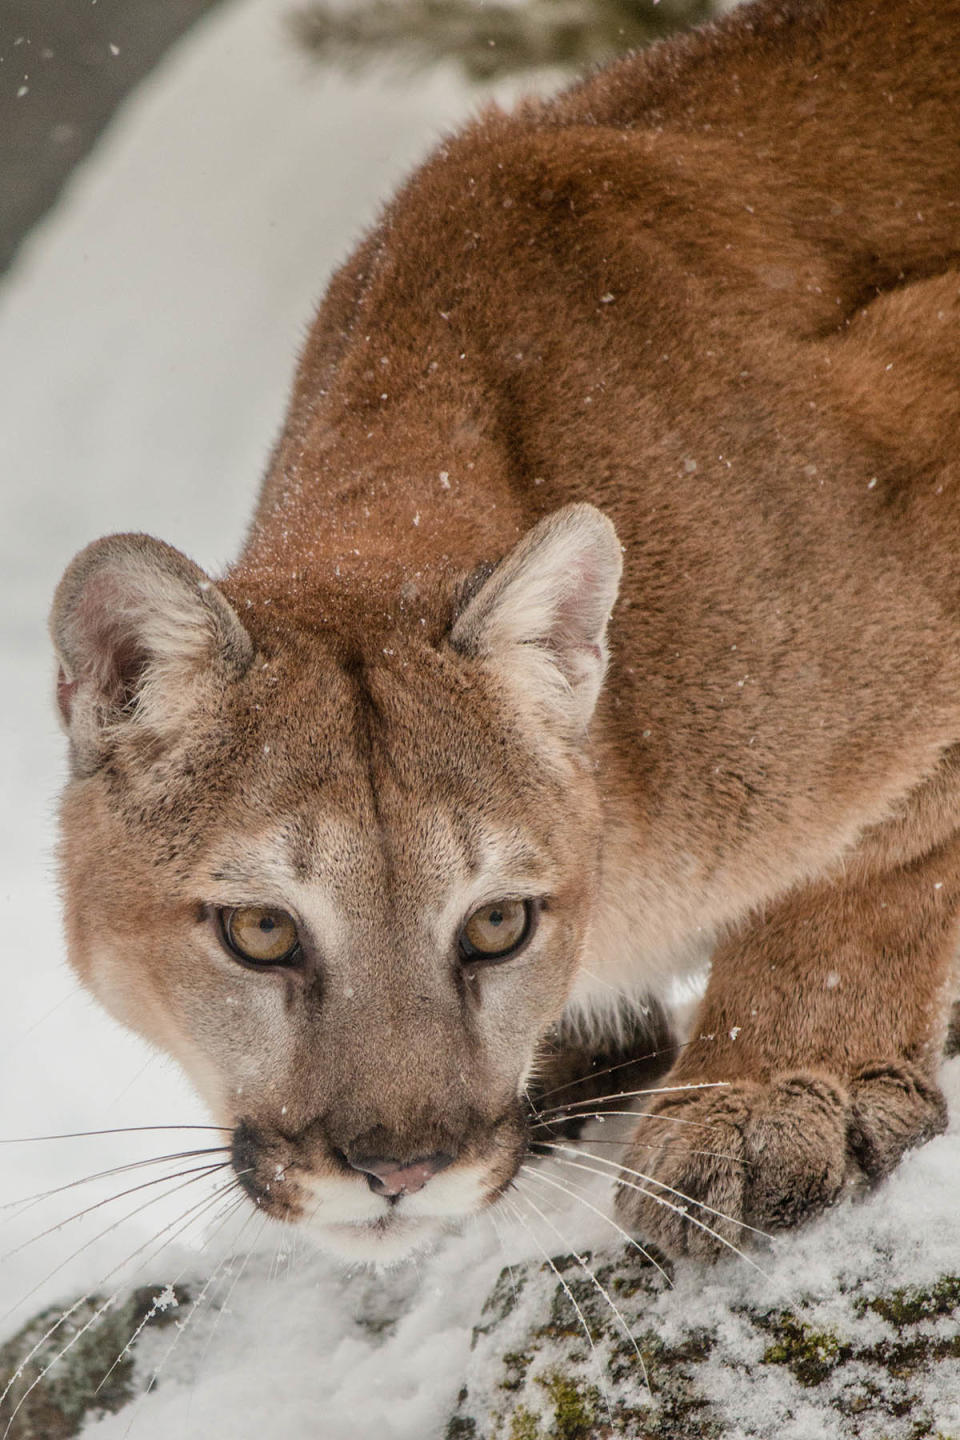 A mountain lion named Kali photographed at the Triple D ranch, looking like she’s on the hunt.